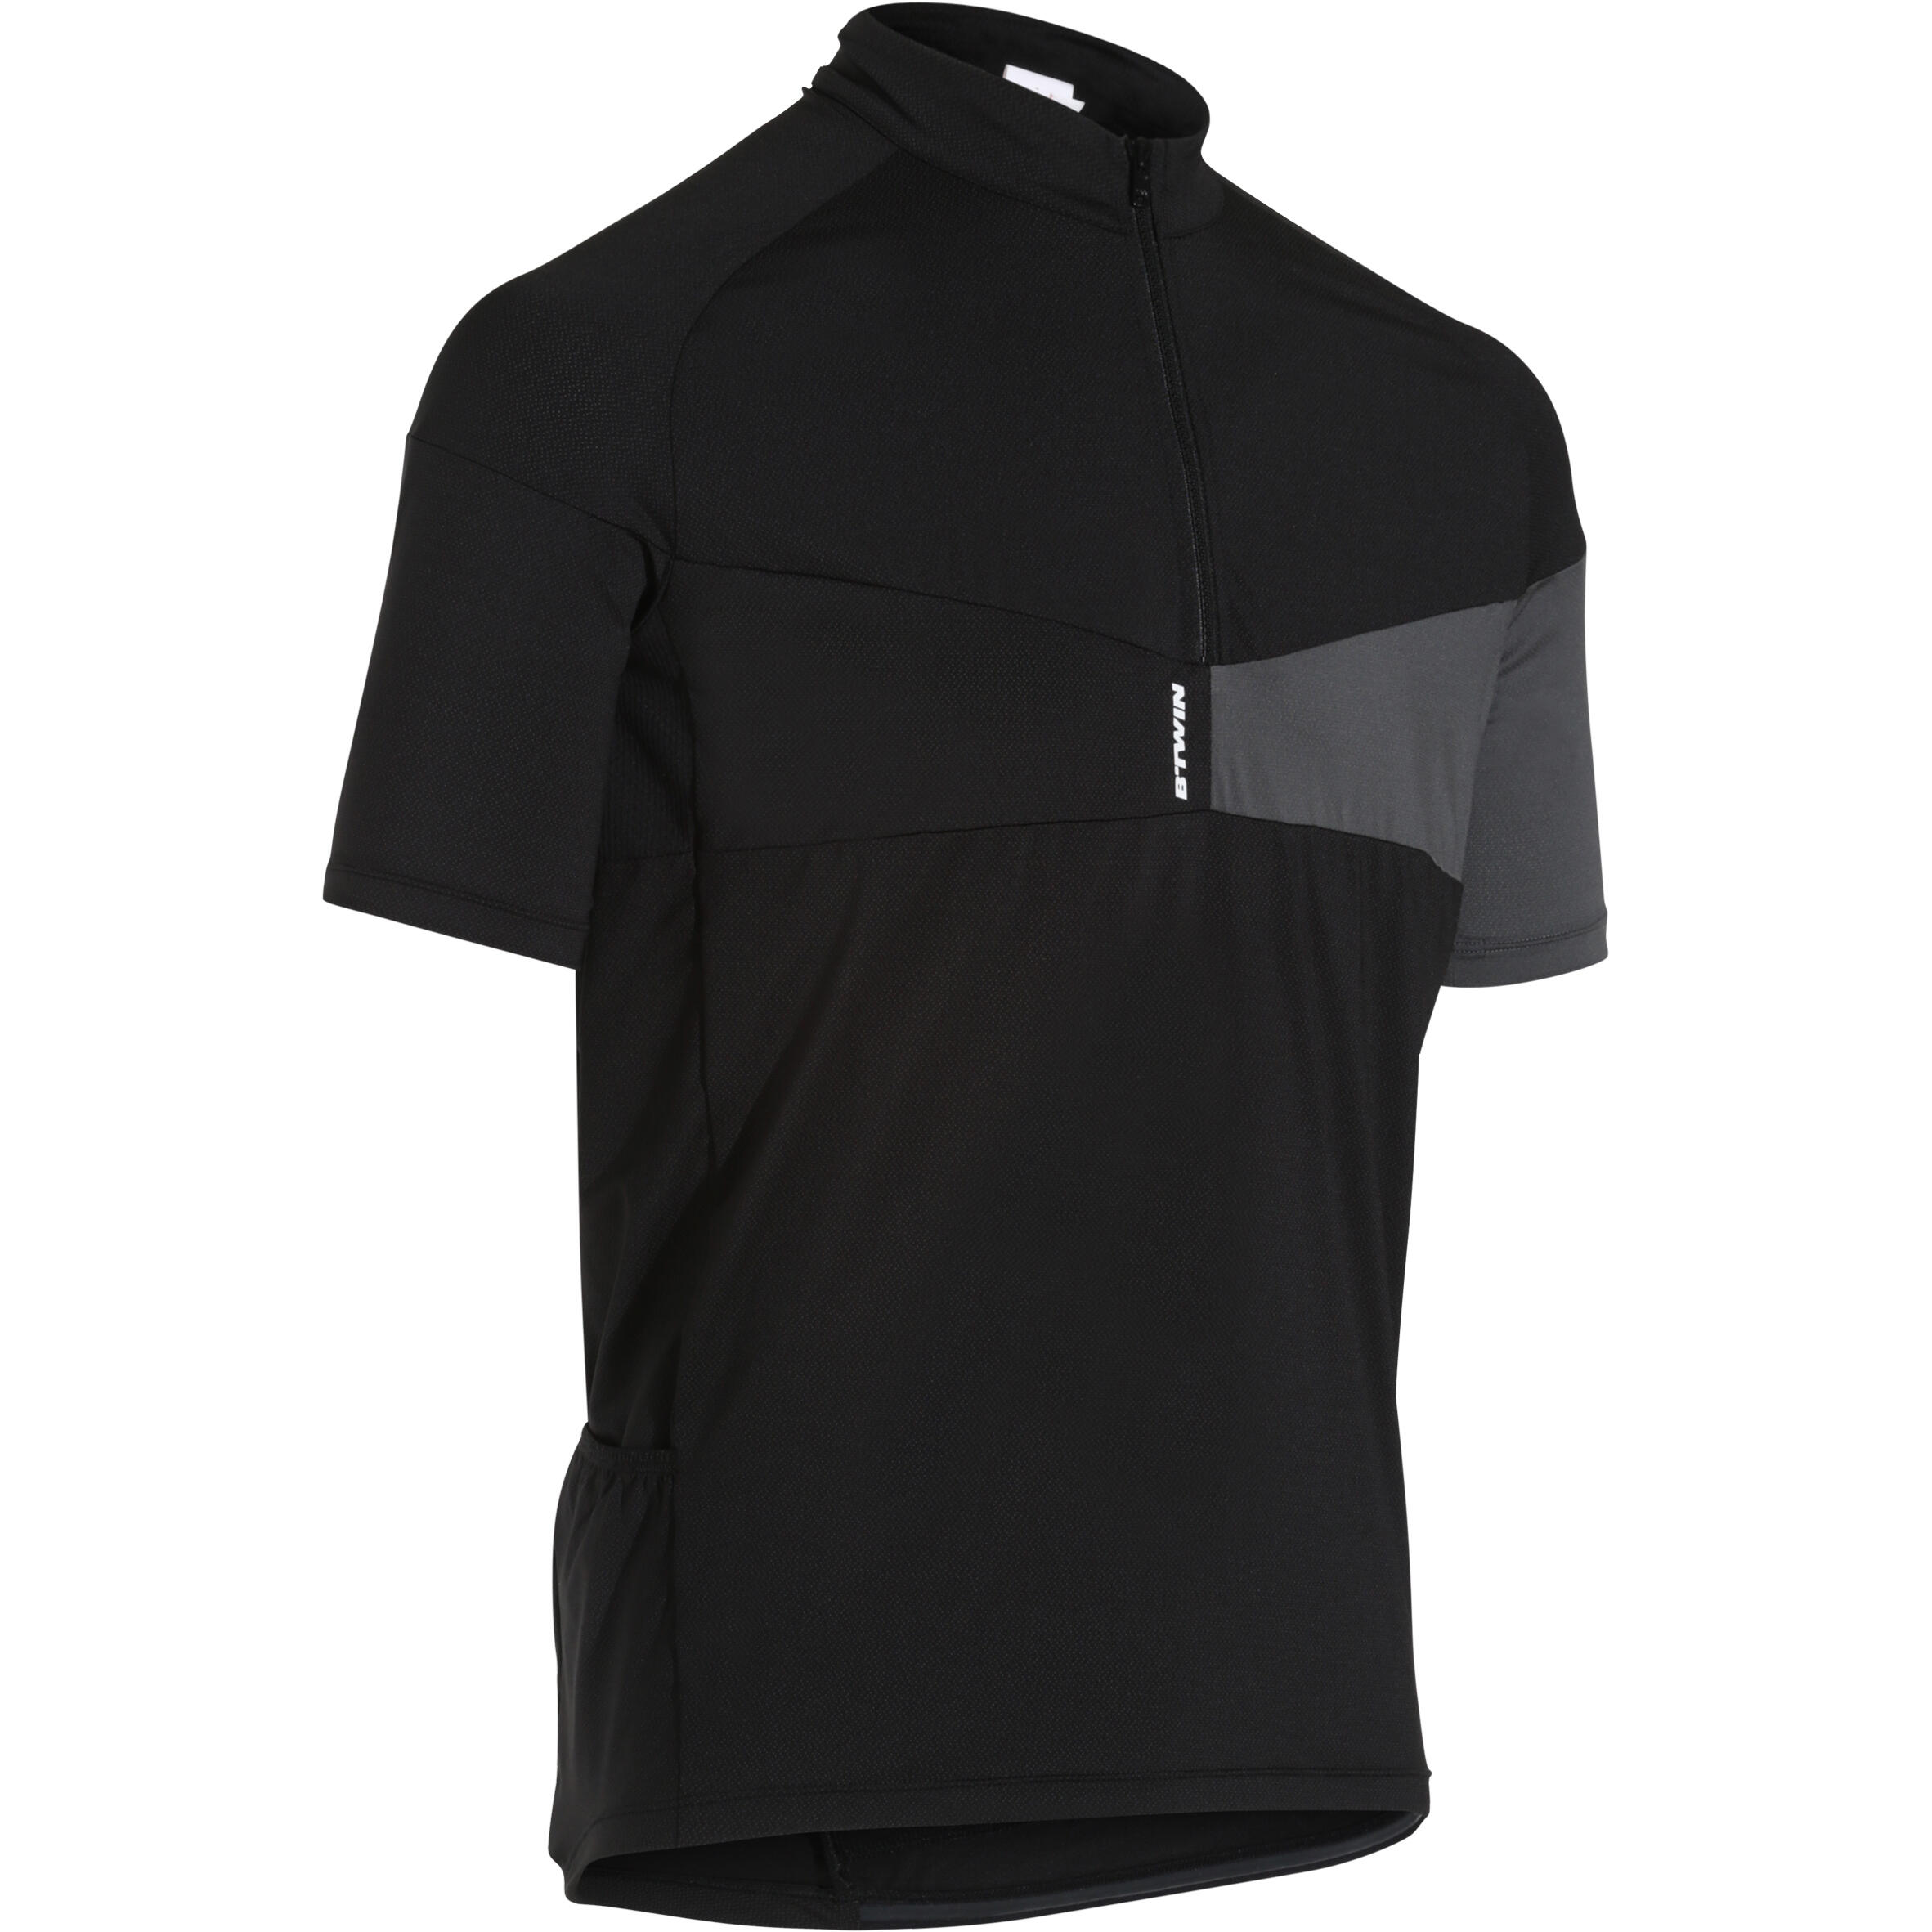 BTWIN 500 Short-Sleeved Cycling Jersey - Black/Grey